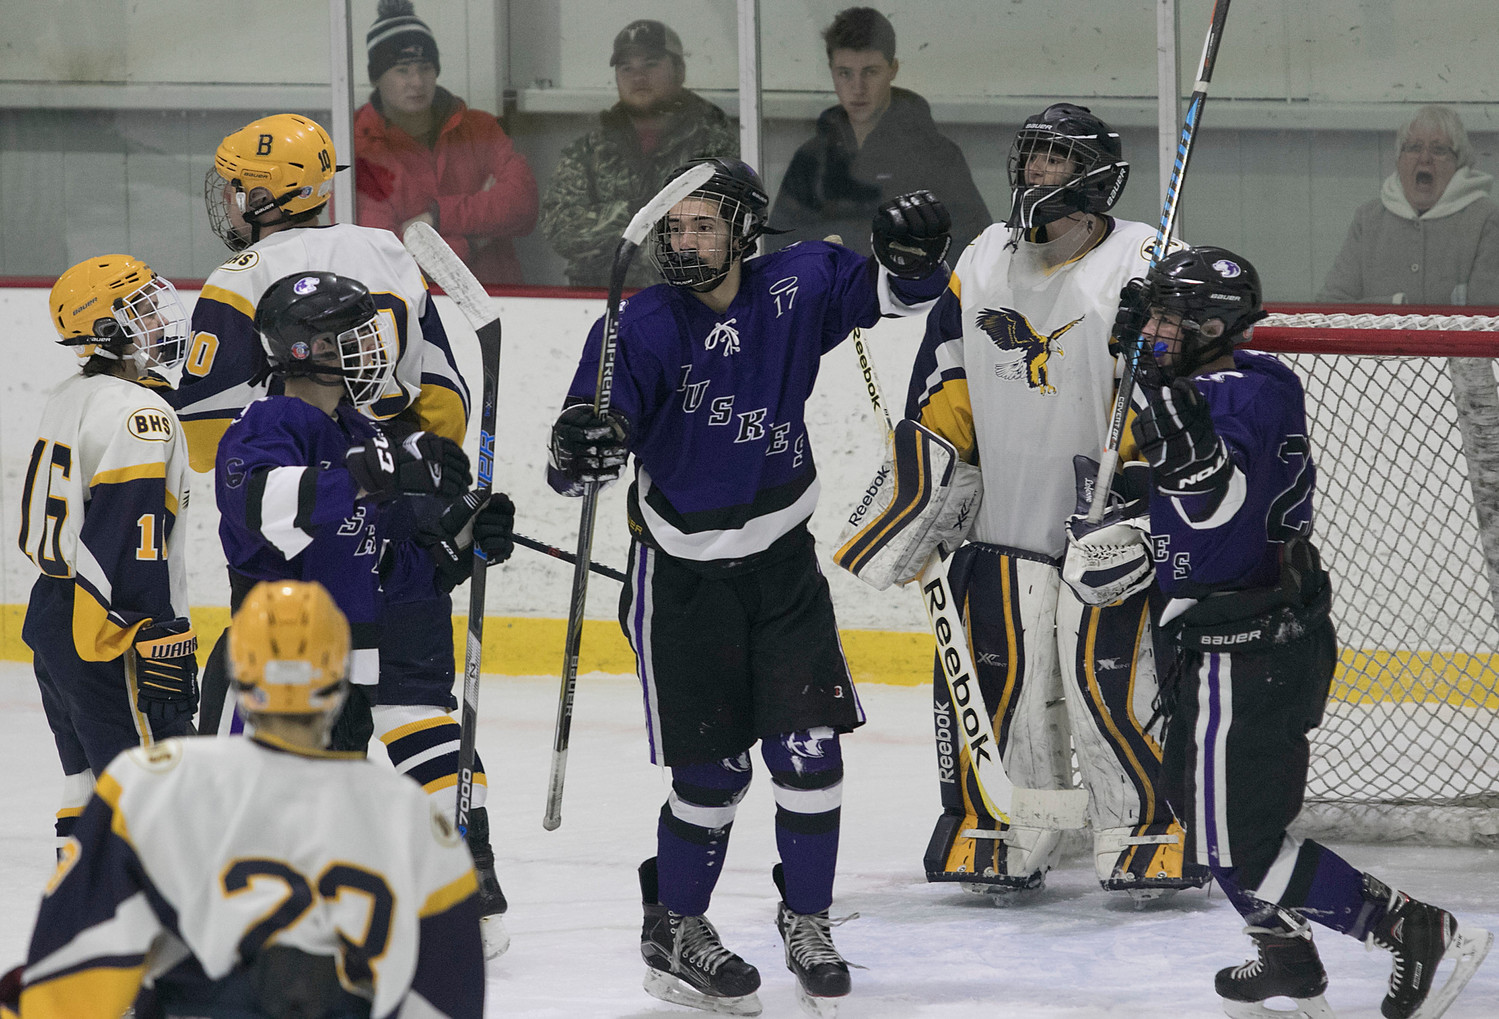 Huskies from left, Jared Rego, Chayton Powell and James Moreira celebrate after Rego scored to put the Mt. Hope on the scoreboard in the second period.